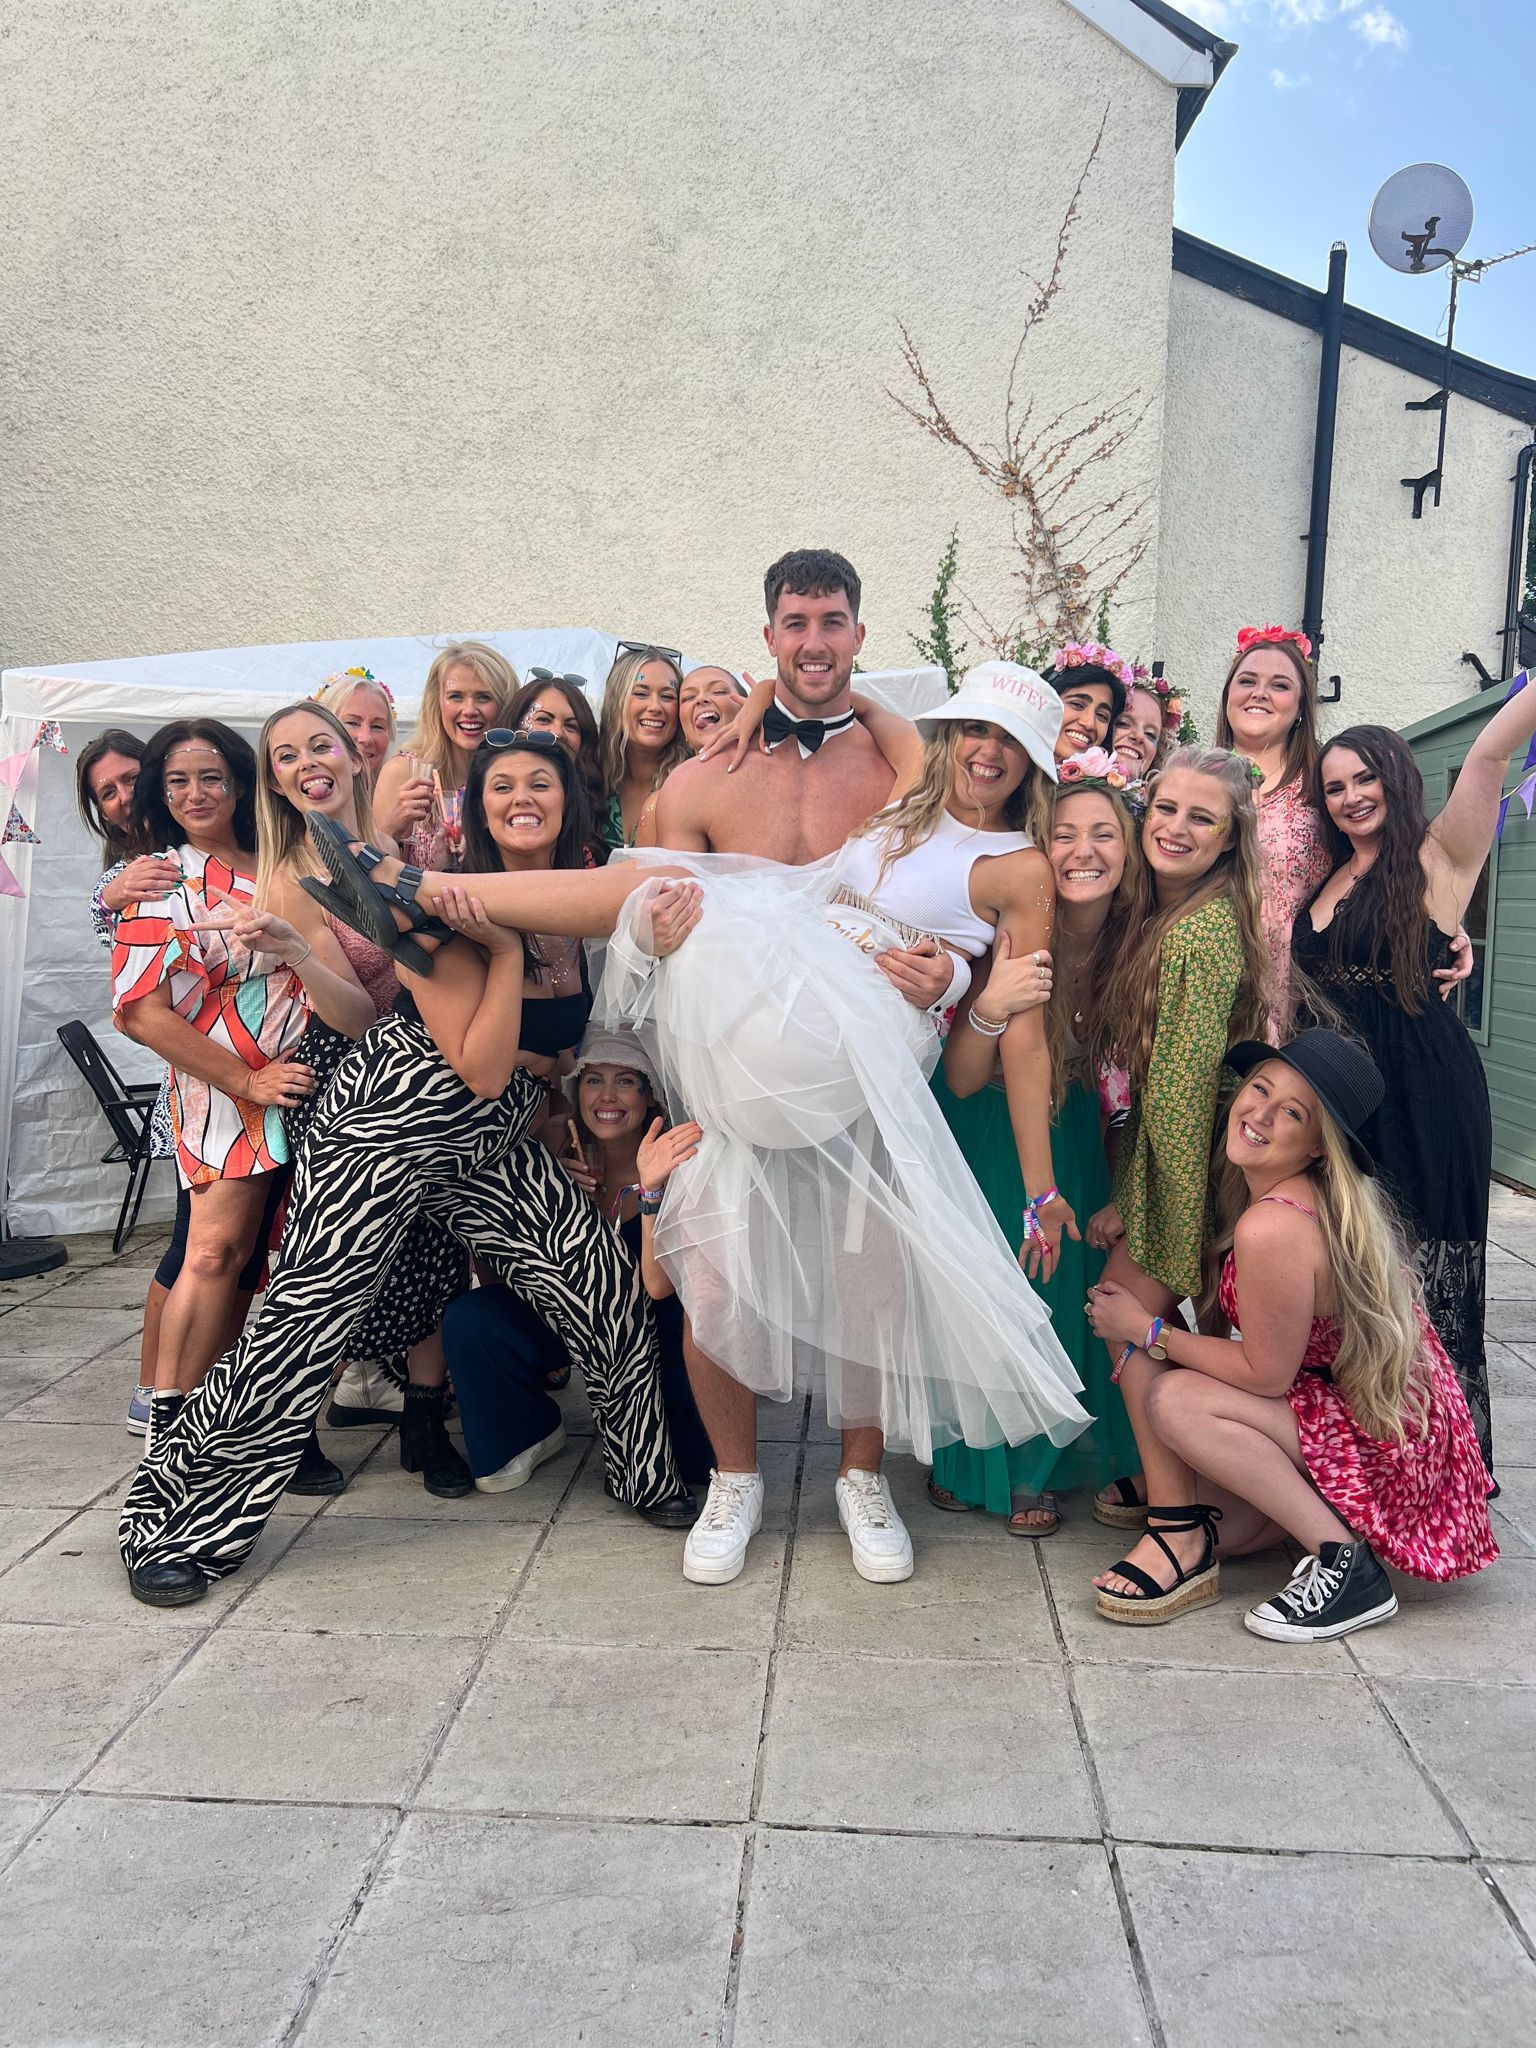 Male stripper and buff butler hen party package uk